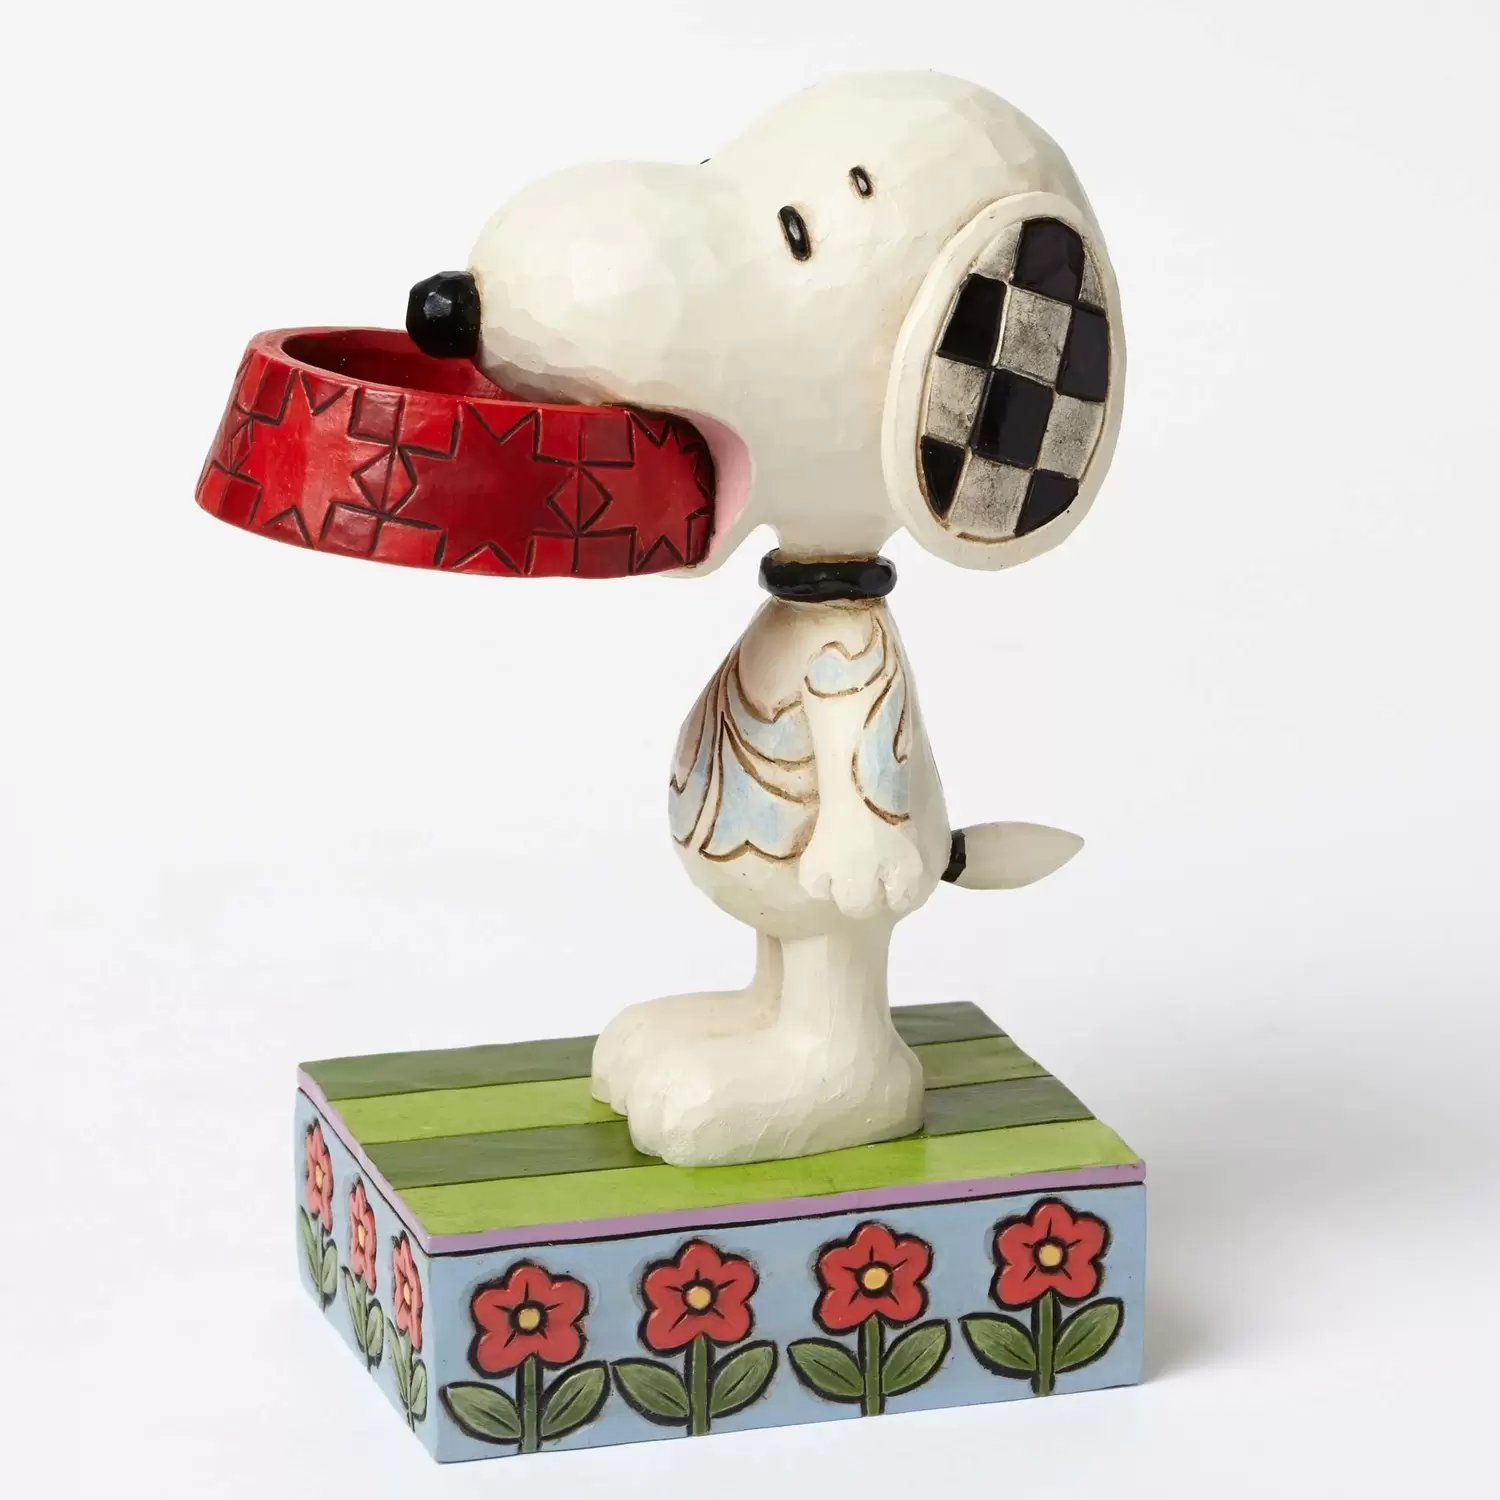 Peanuts - Jim Shore - More Food Please - Snoopy Holding Dog Dish